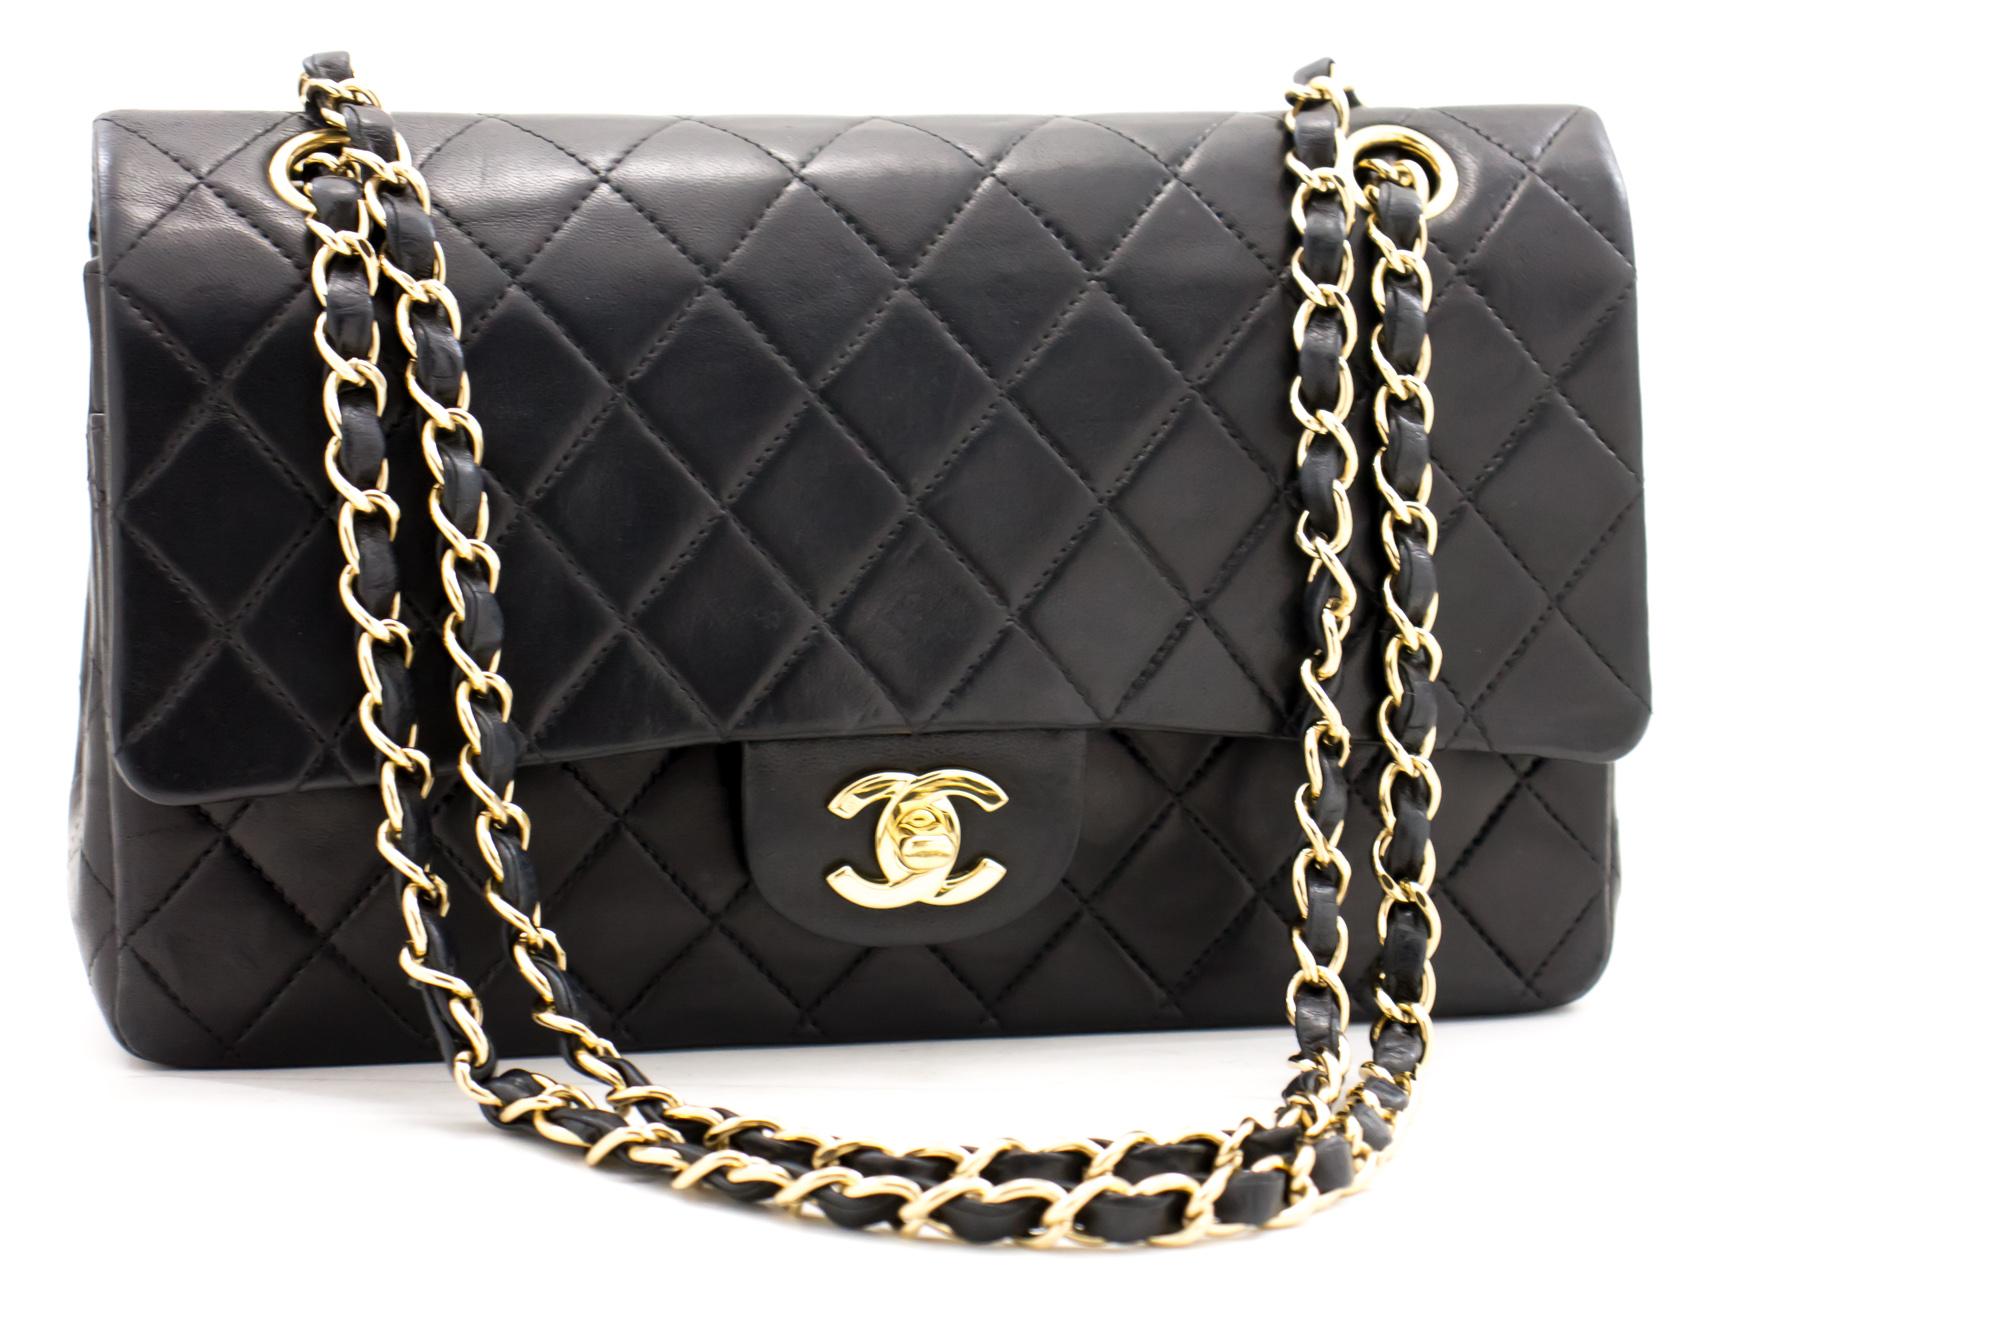 An authentic CHANEL 2.55 Classic Double Flap Medium Chain Shoulder Bag Black made of black Lambskin. The color is Black. The outside material is Leather. The pattern is Solid. This item is Contemporary. The year of manufacture would be 2 0 0 2